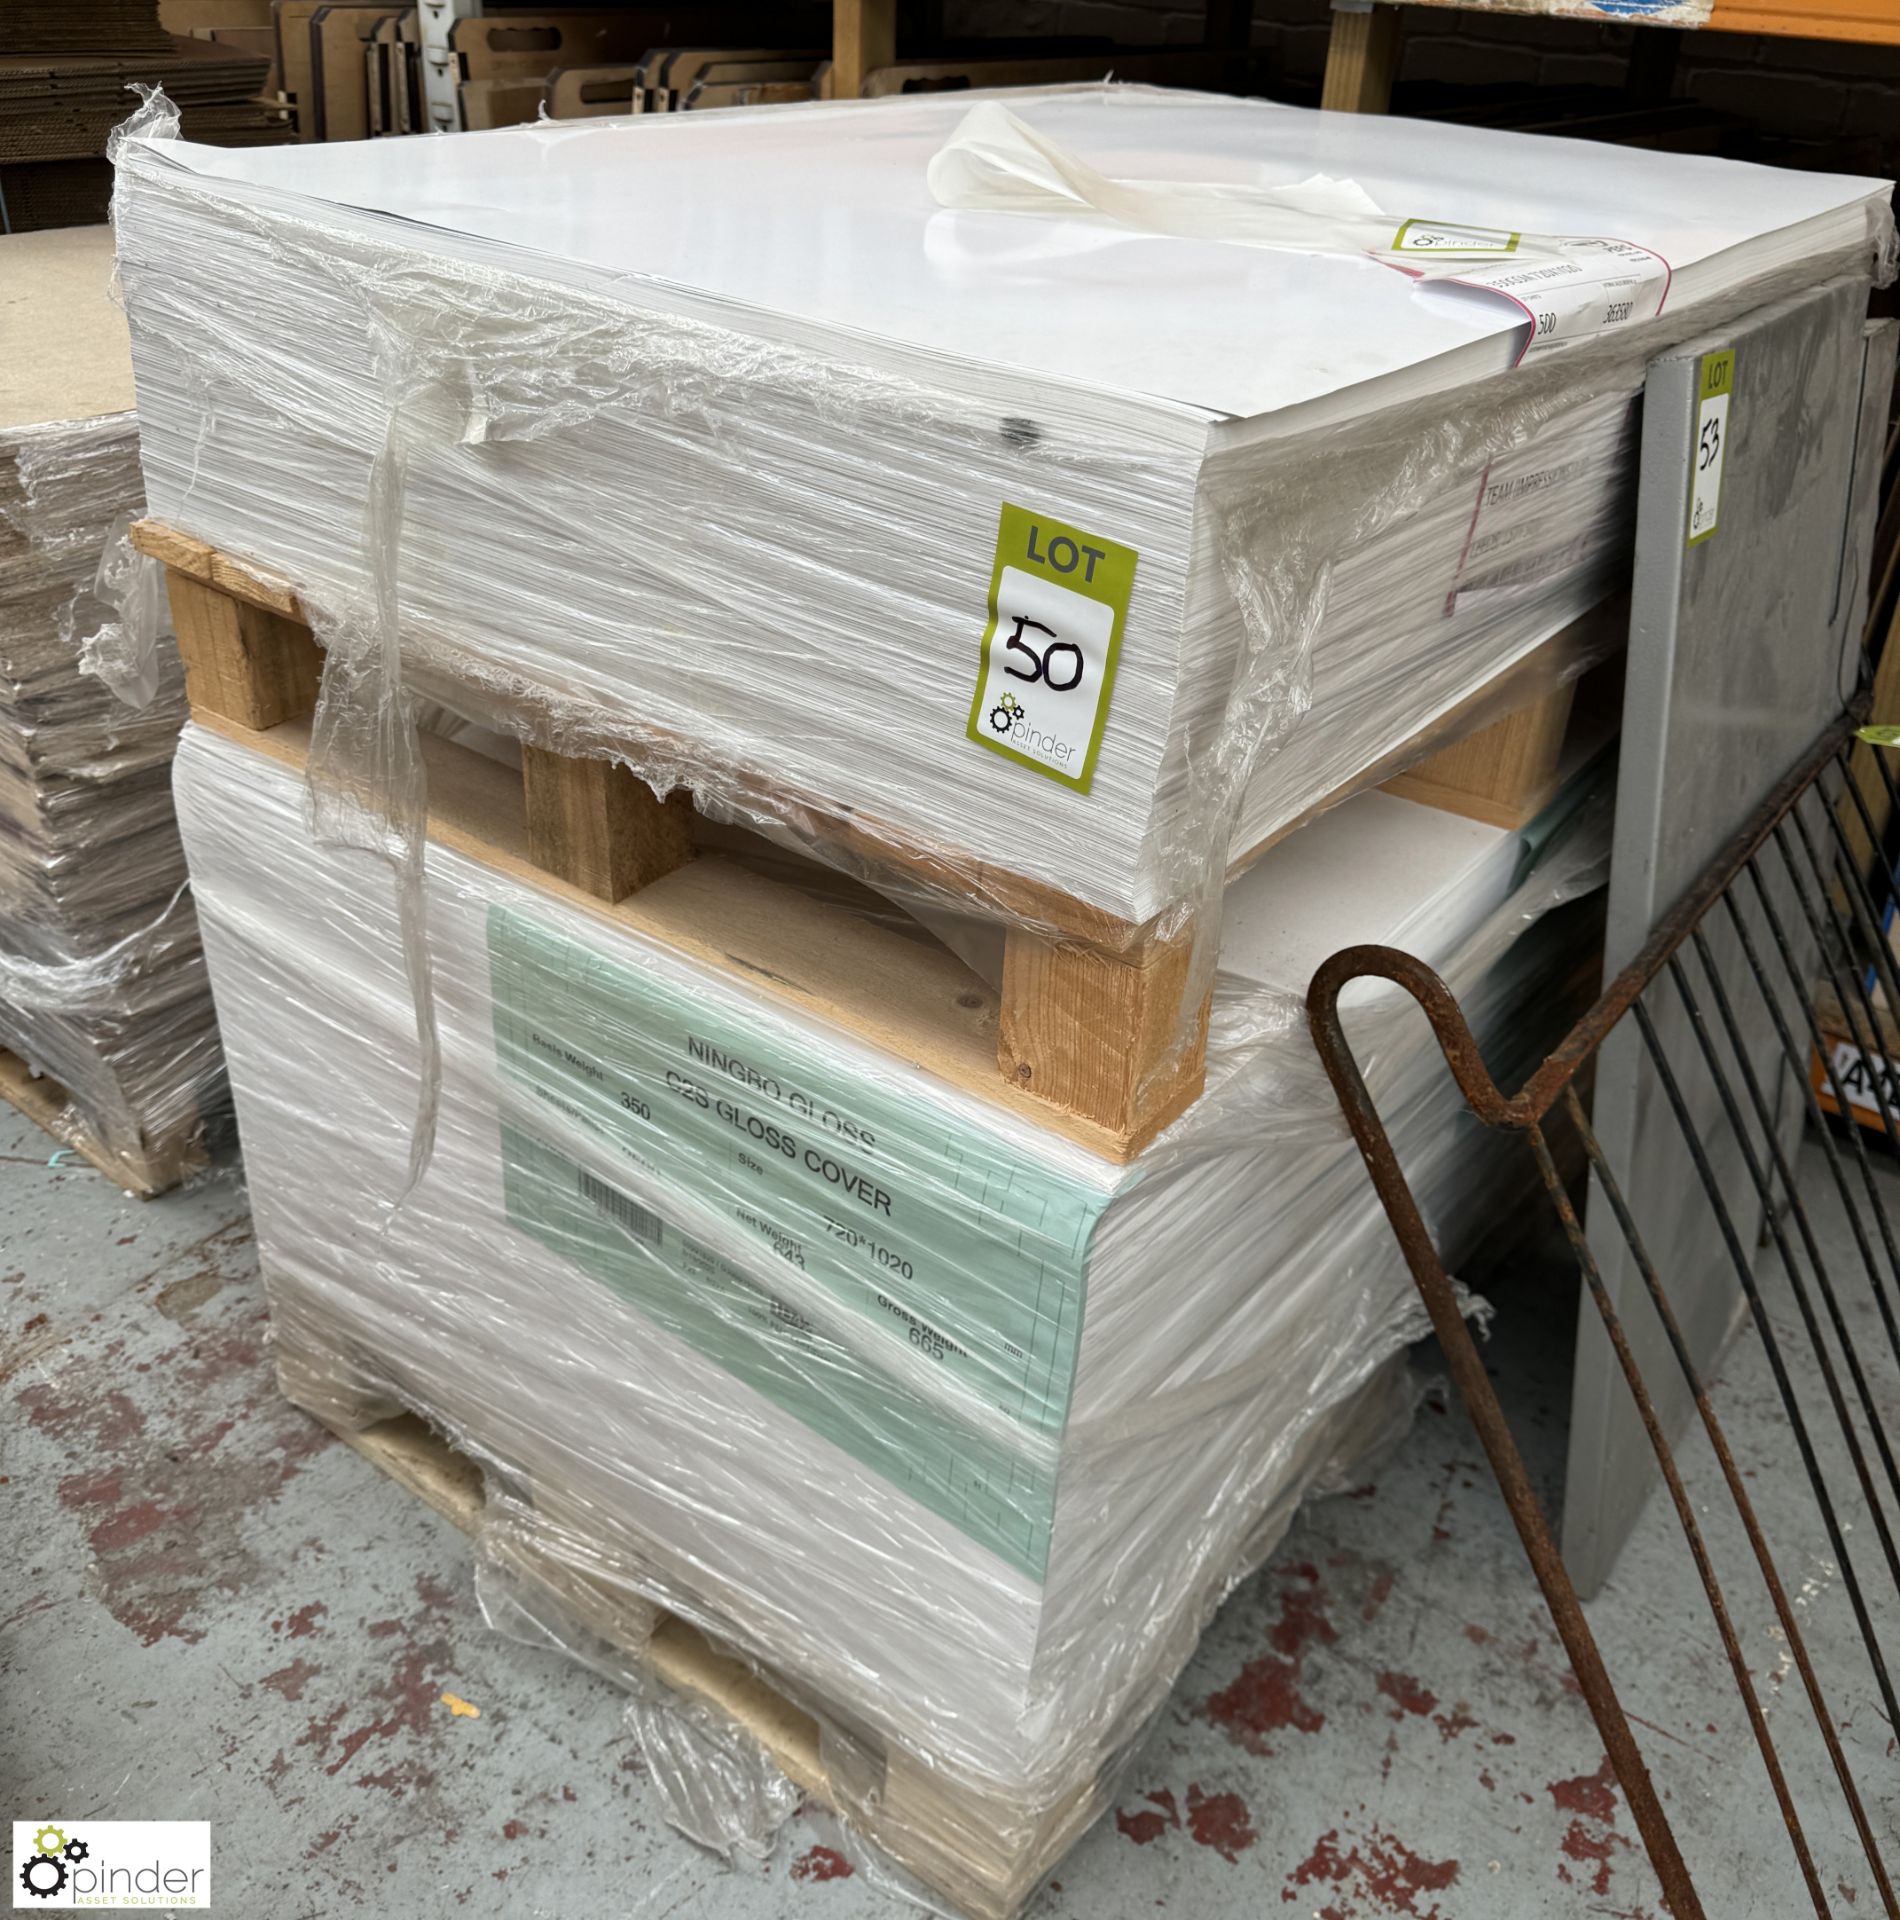 Quantity Nimbo C25 Gloss Card, 720mm x 1020mm, to 2 pallets - Image 2 of 4